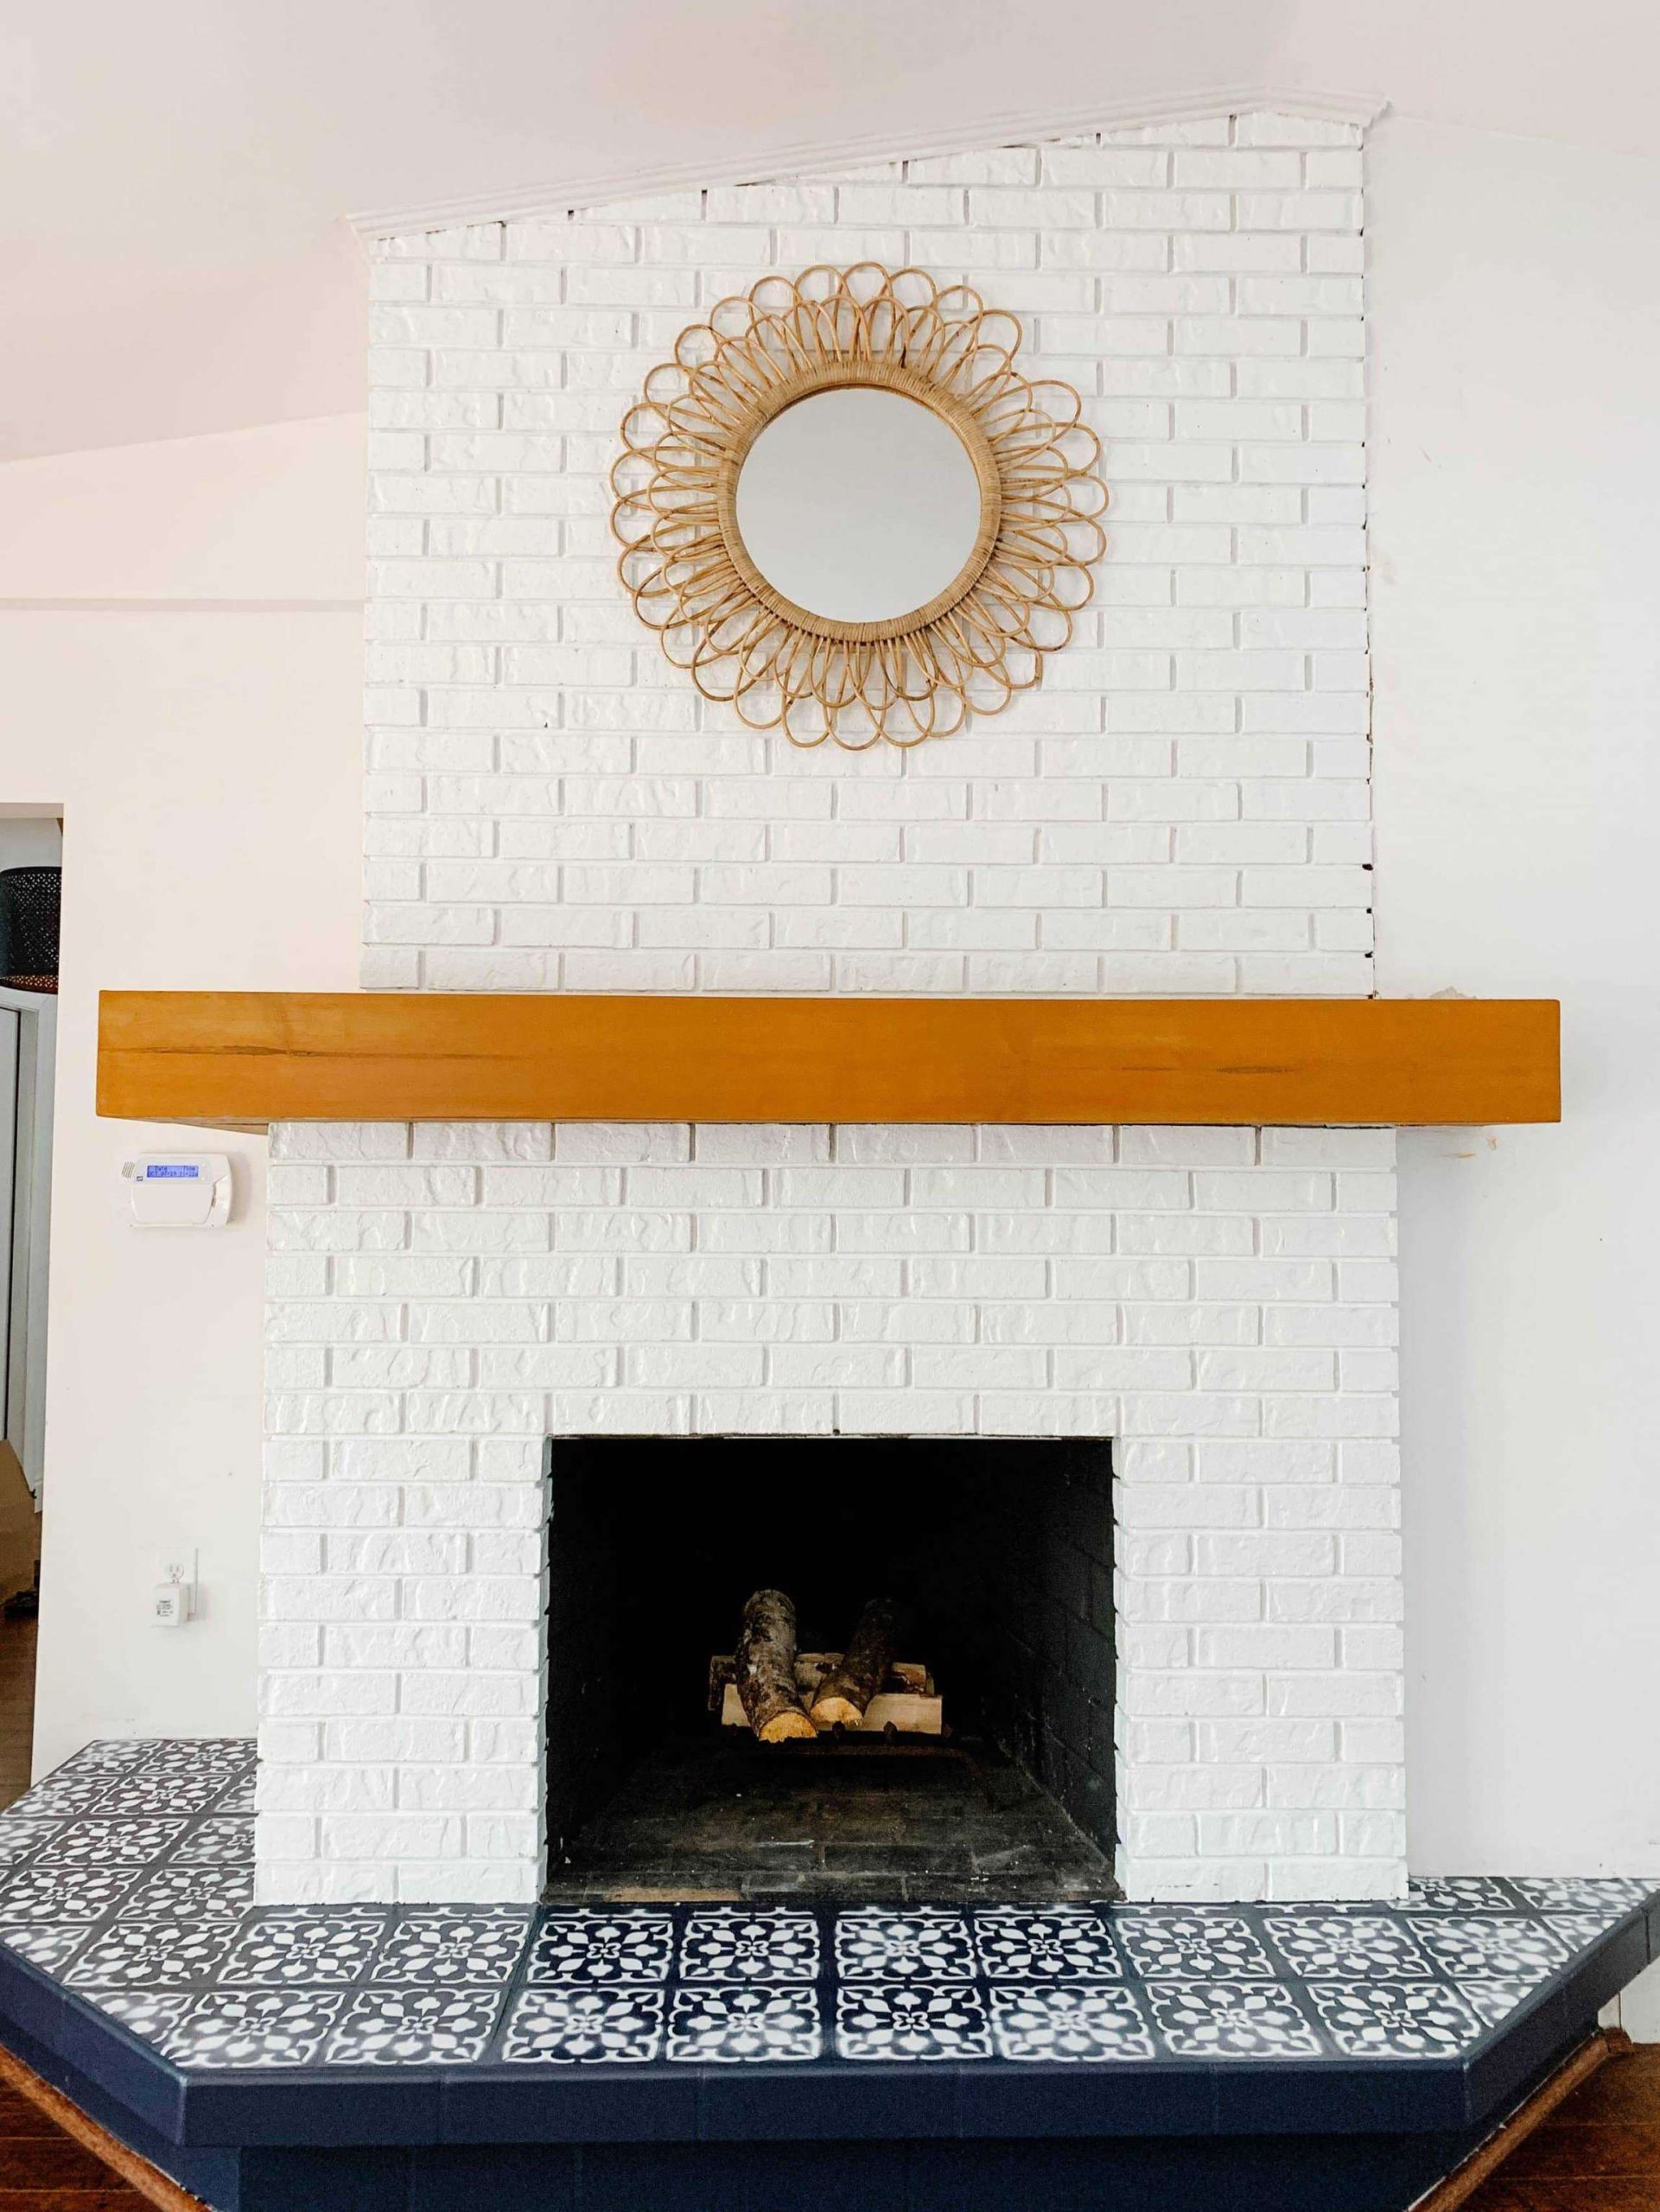 How To Paint Fireplace Tile With A Stencil: Mistakes To Avoid On